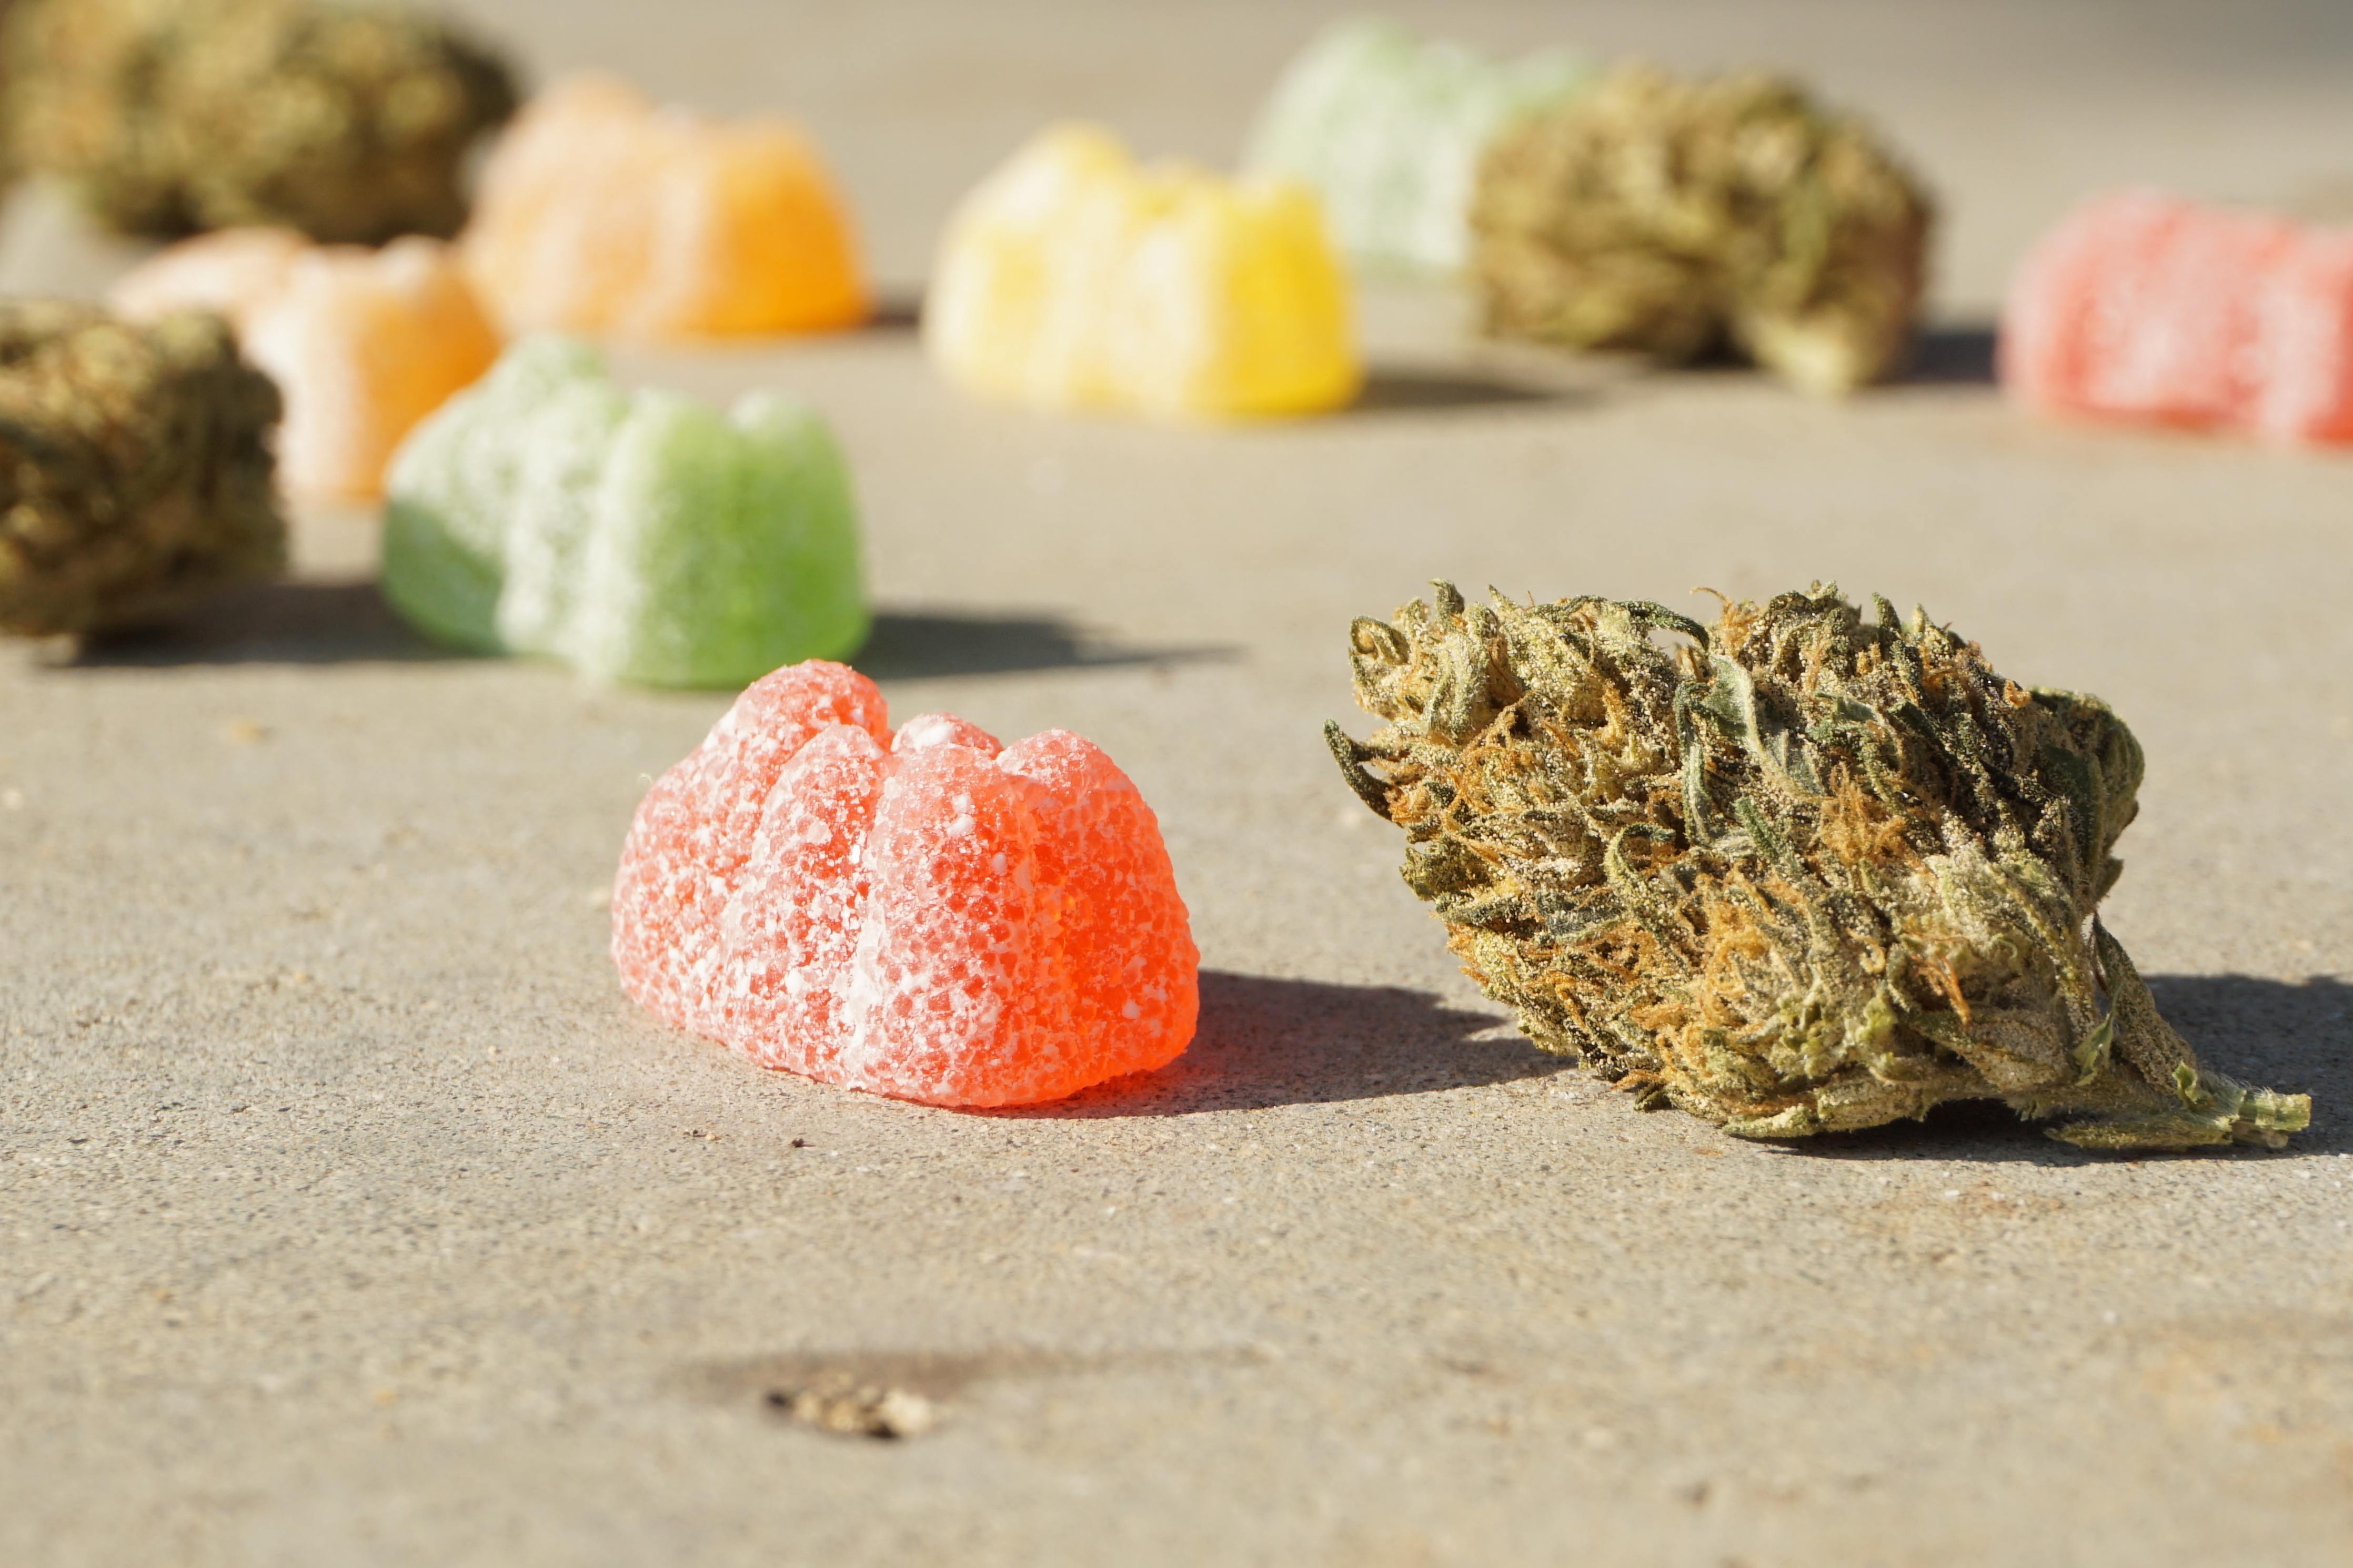 A collection of cannabis gummies sits next to cannabis flower buds.